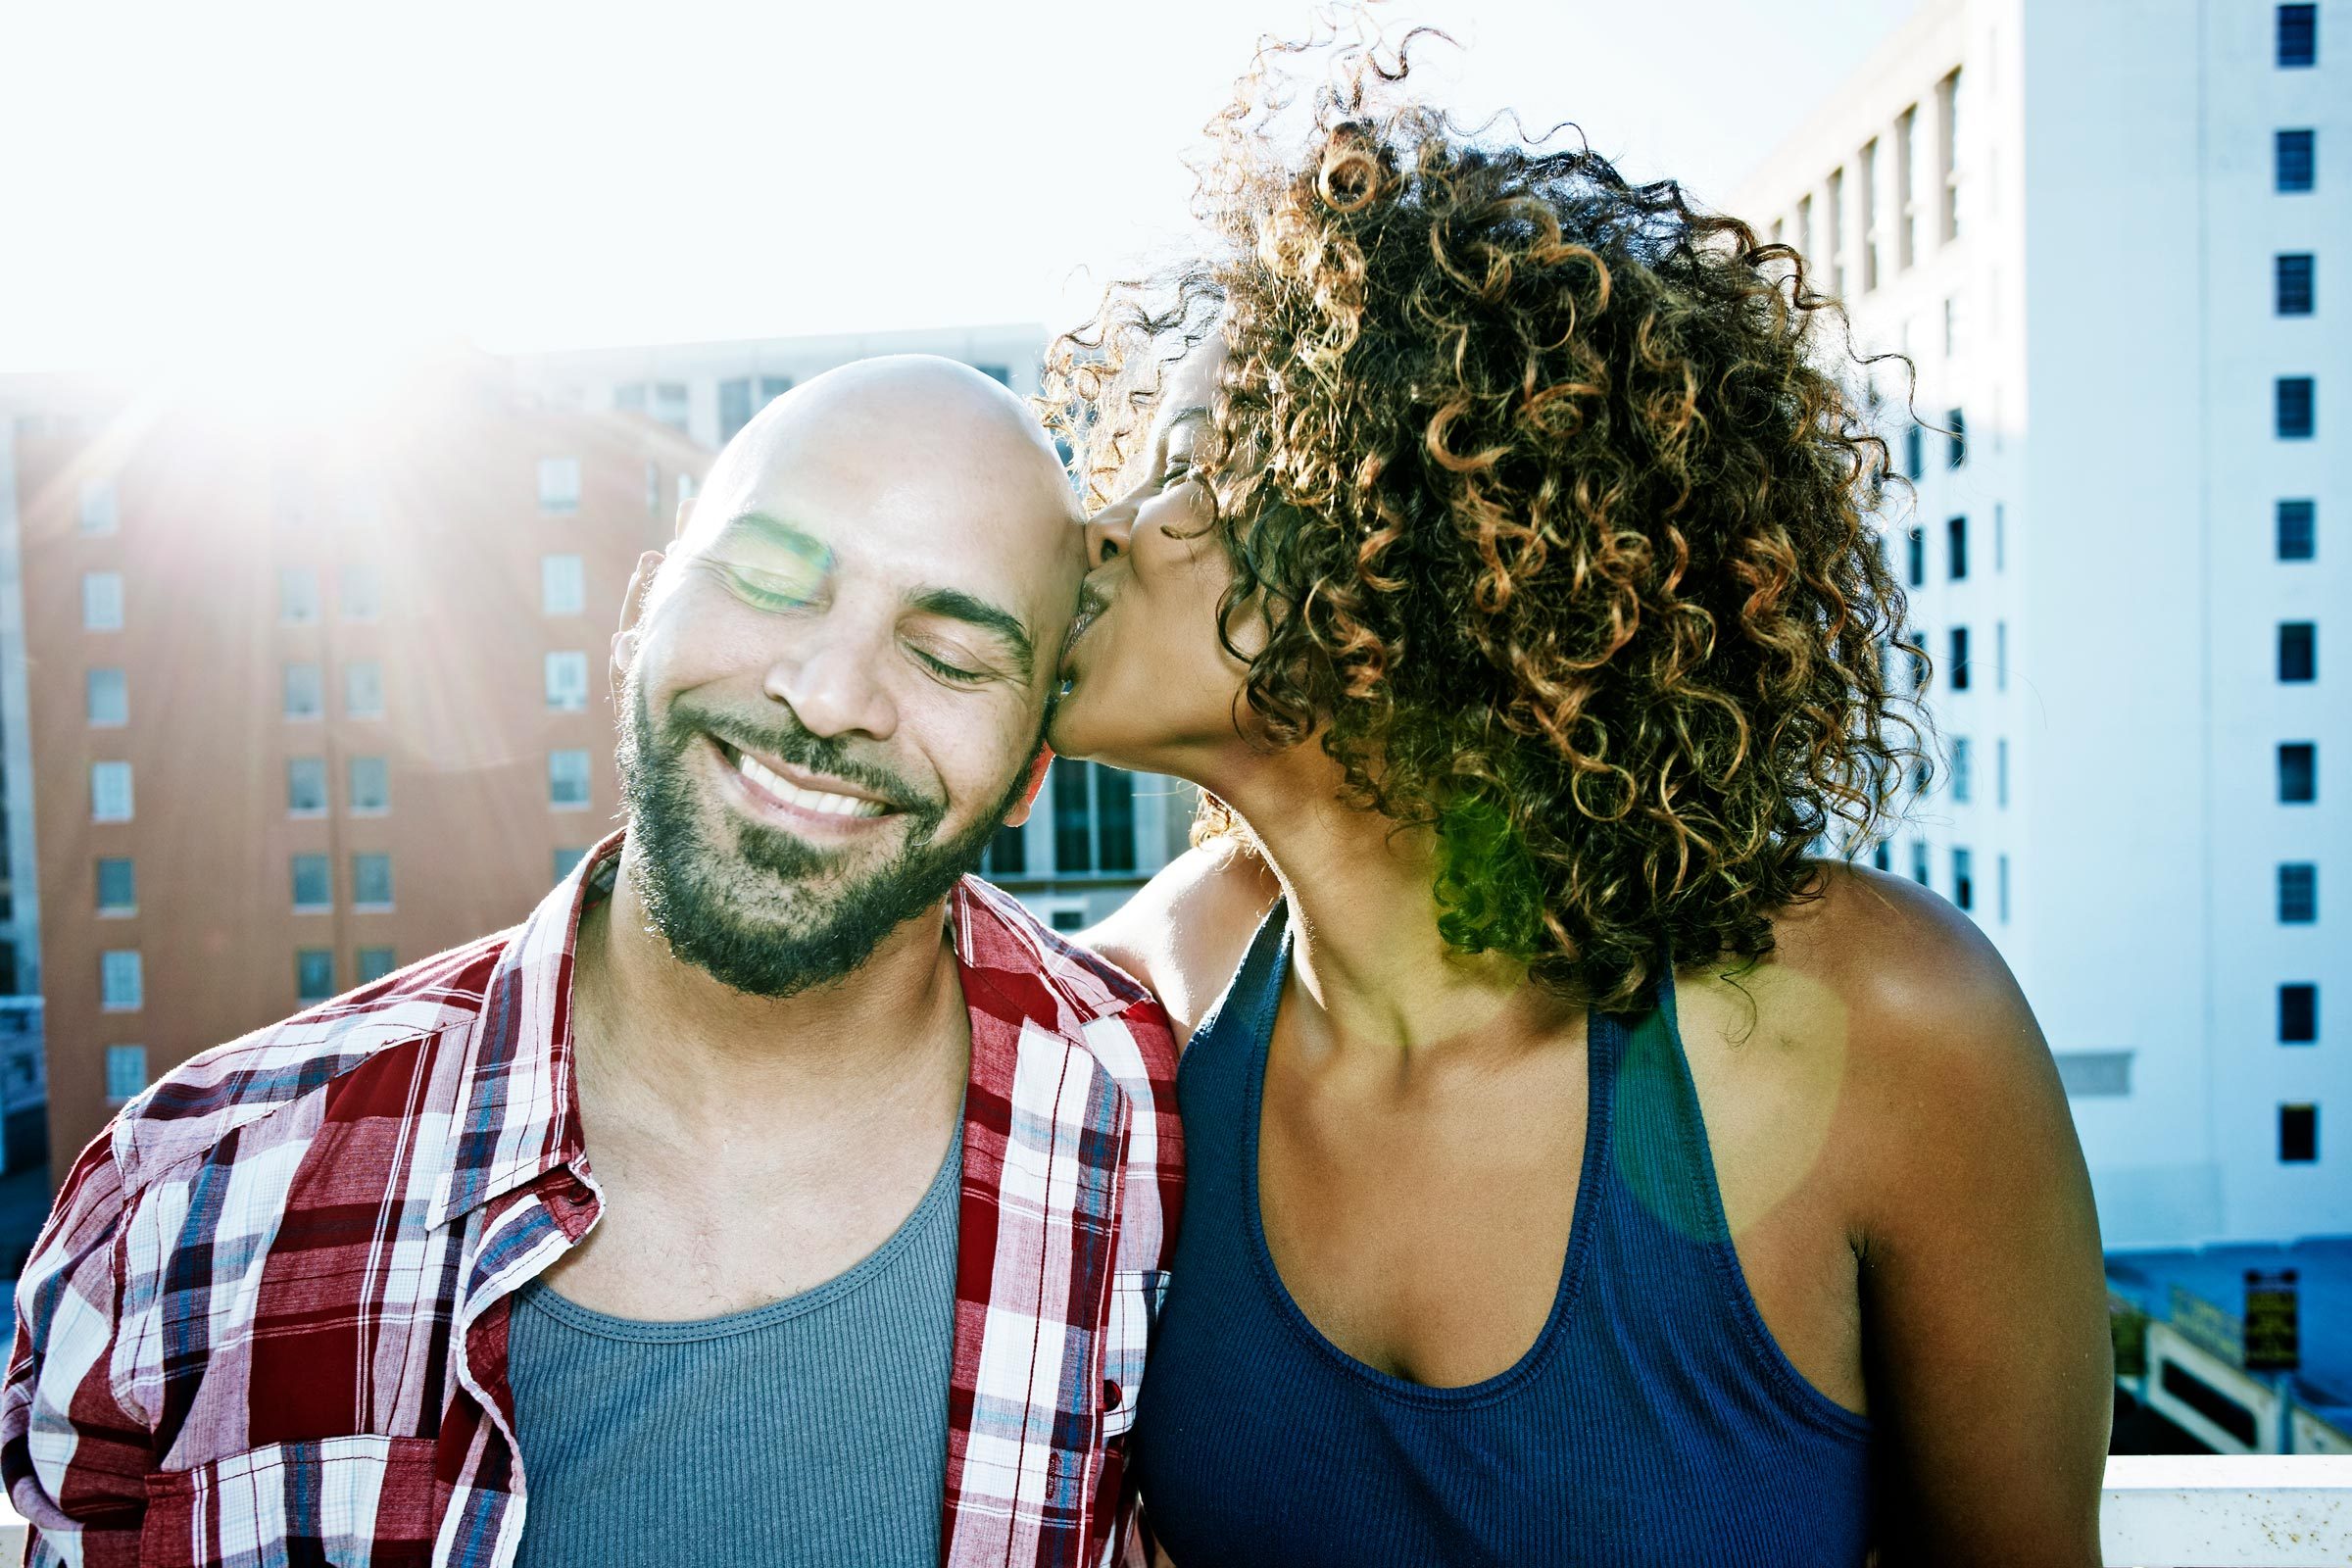 Attachment Styles Quiz: What's Your Relationship Attachment Style?